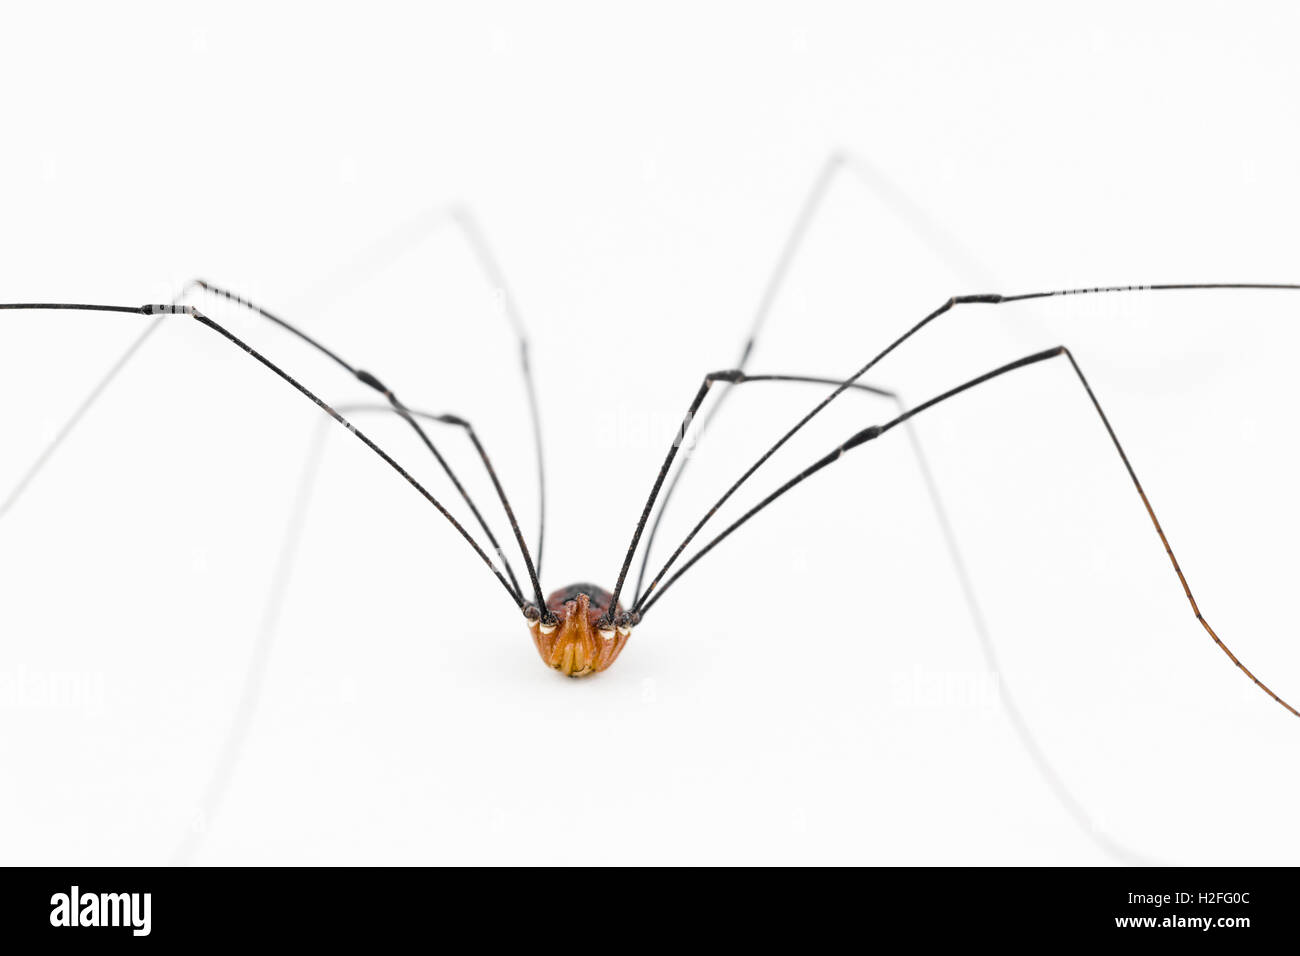 This opiliones is an arachnid but not a spider.  It has a fused body with 8 legs. Close up of frontal body parts. Stock Photo